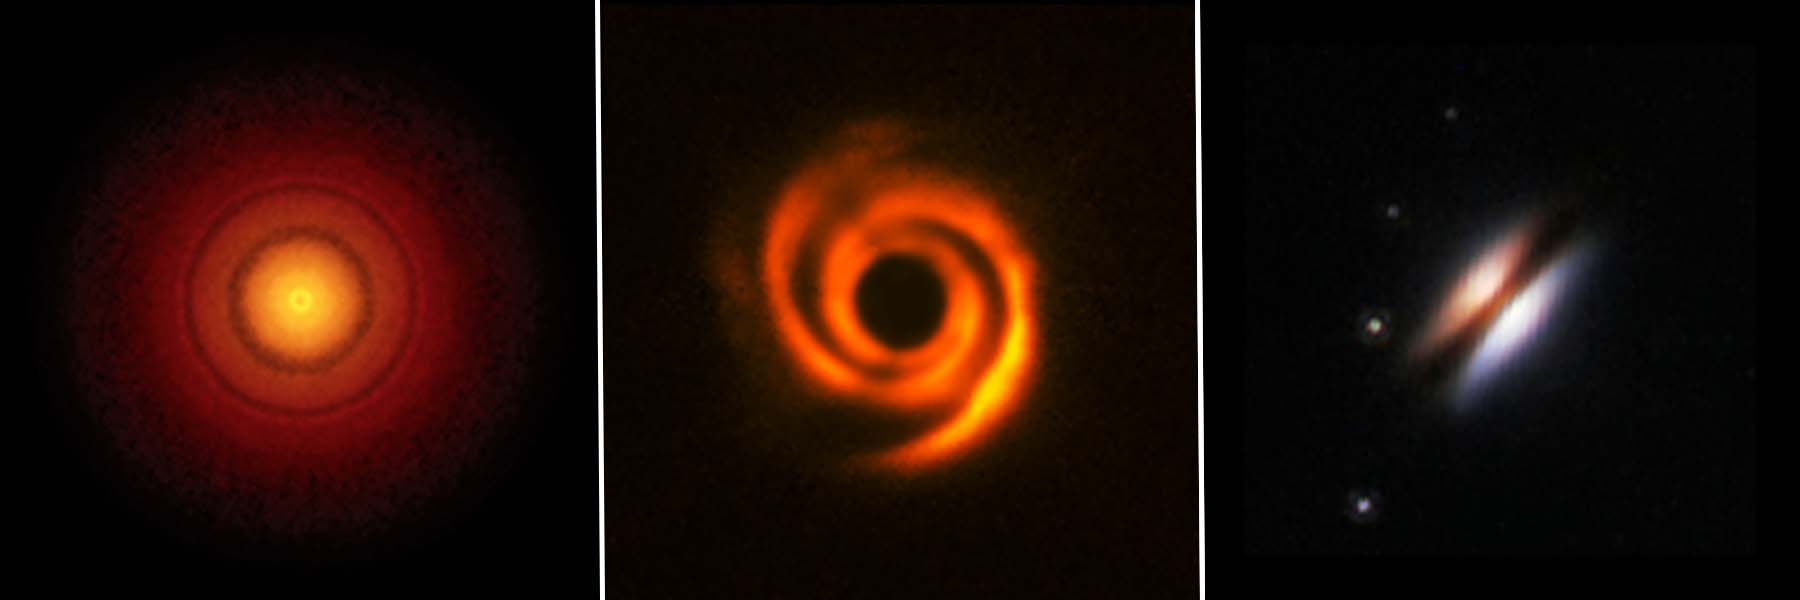 Still-forming solar systems, known as planet-forming disks, come in a variety of shapes and sizes.